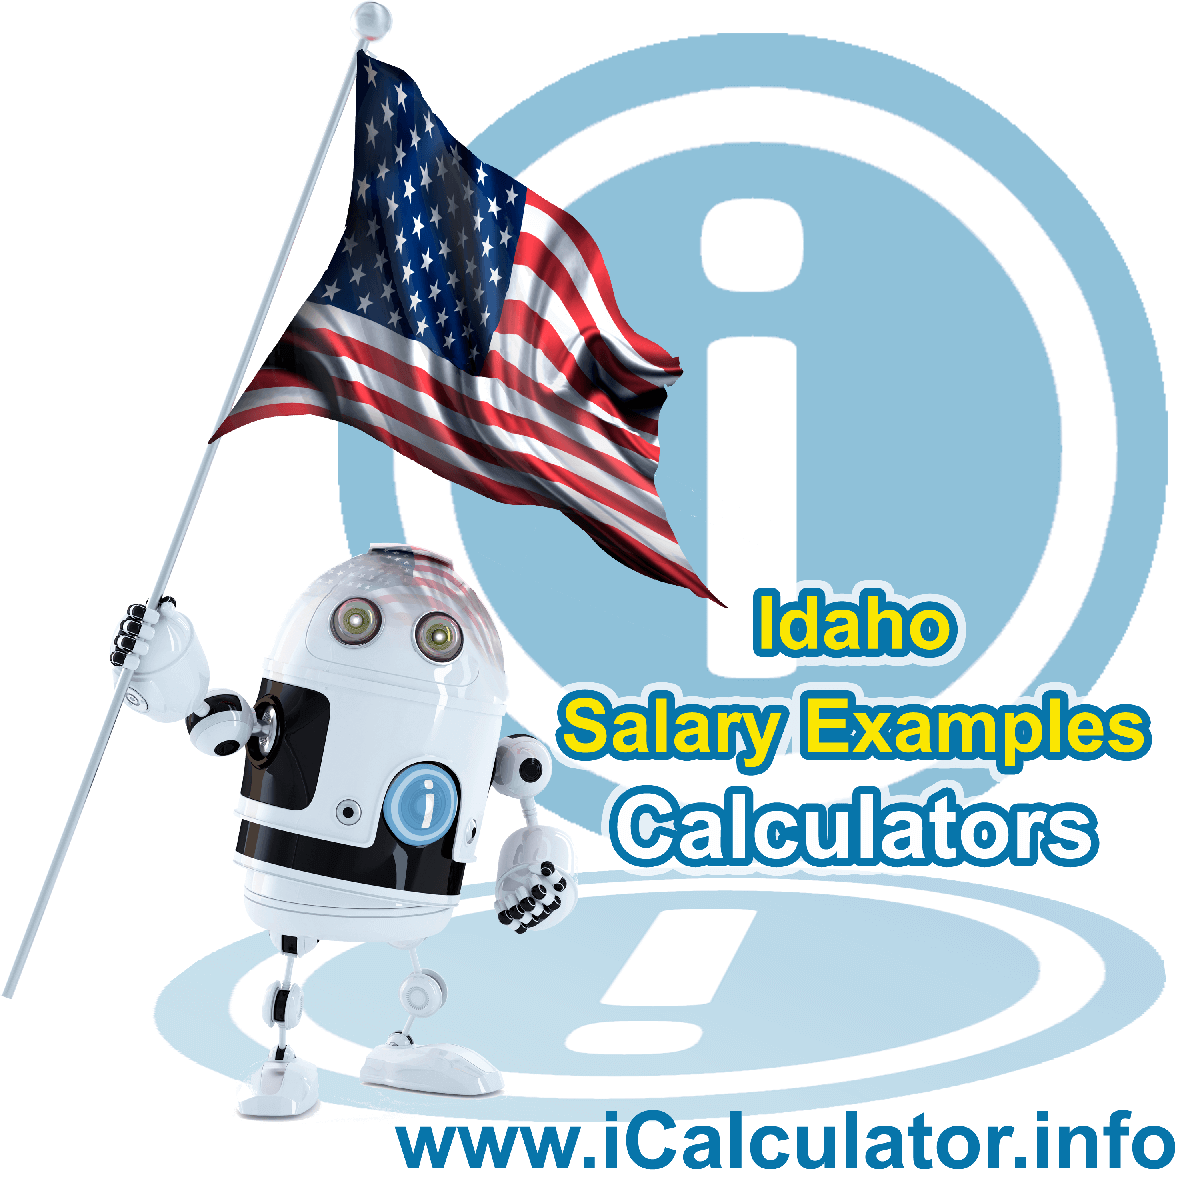 Idaho Salary Example for $150,000.00 in 2022 | iCalculator™ | $150,000.00 salary example for employee and employer paying Idaho State tincome taxes. Detailed salary after tax calculation including Idaho State Tax, Federal State Tax, Medicare Deductions, Social Security, Capital Gains and other income tax and salary deductions complete with supporting Idaho state tax tables 